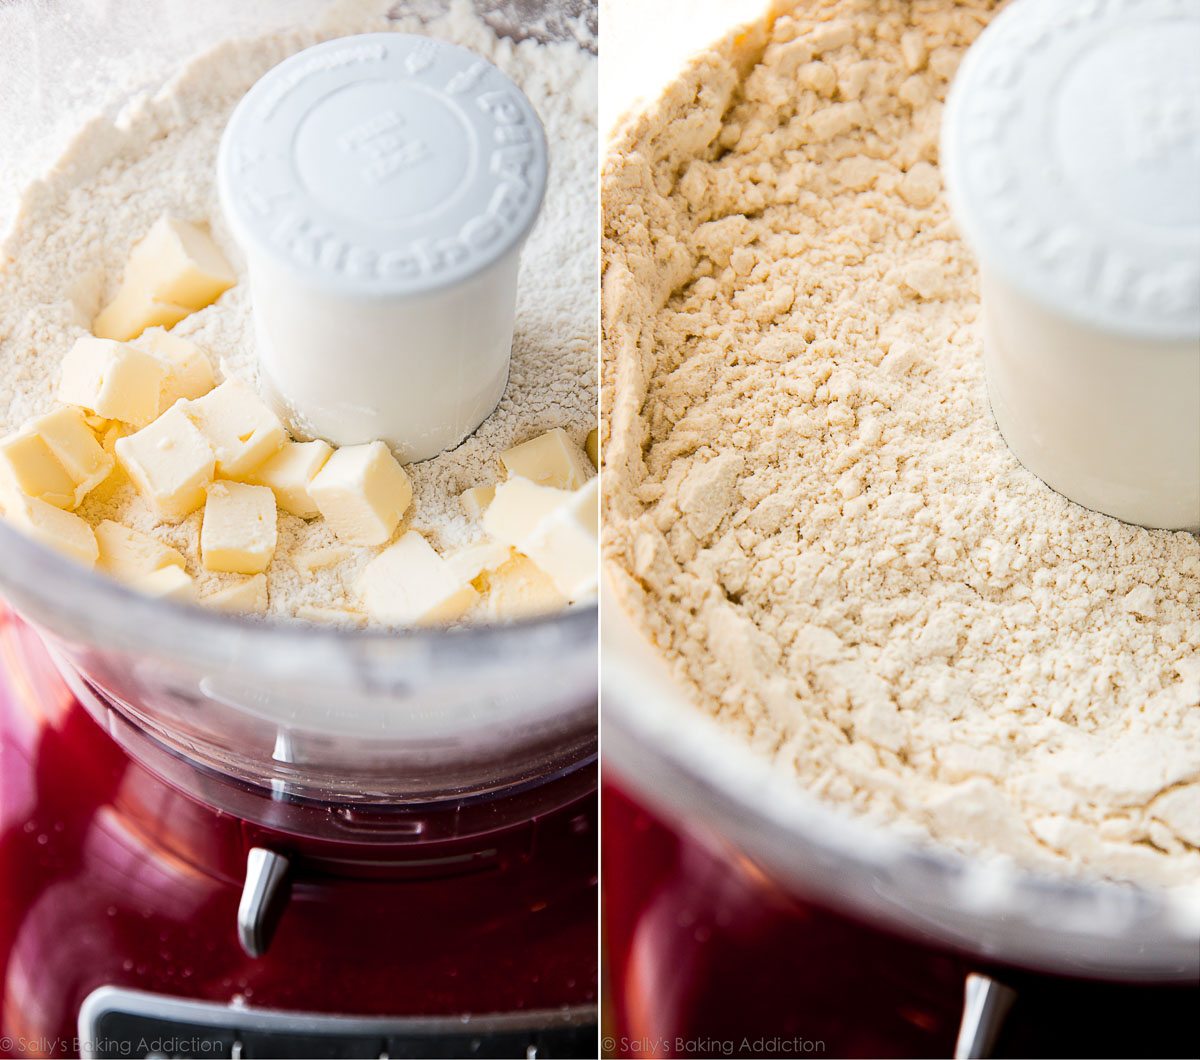 2 images of butter and flour in food processor before mixing and mixture after using food processor